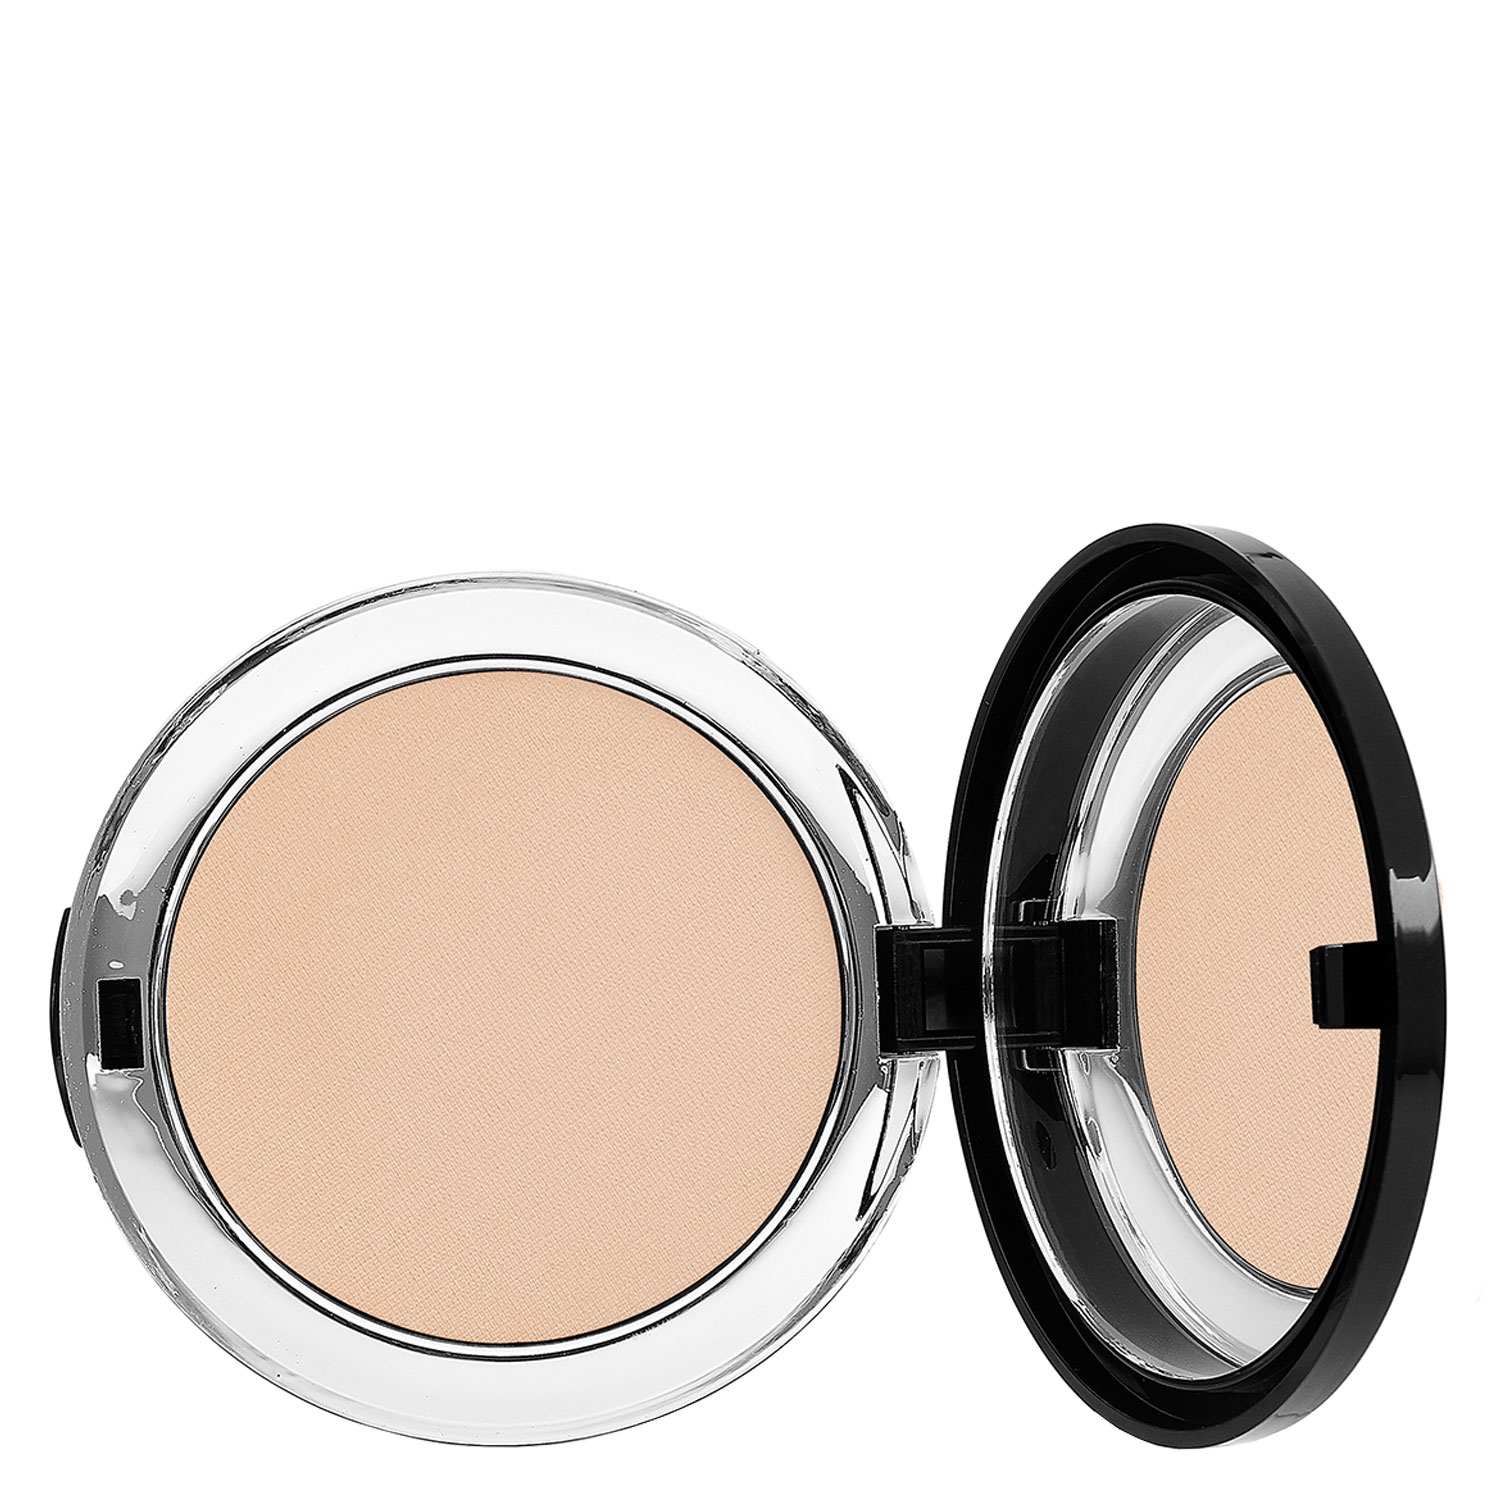 Product image from bellapierre Teint - Compact Mineral Foundation SPF15 Ivory